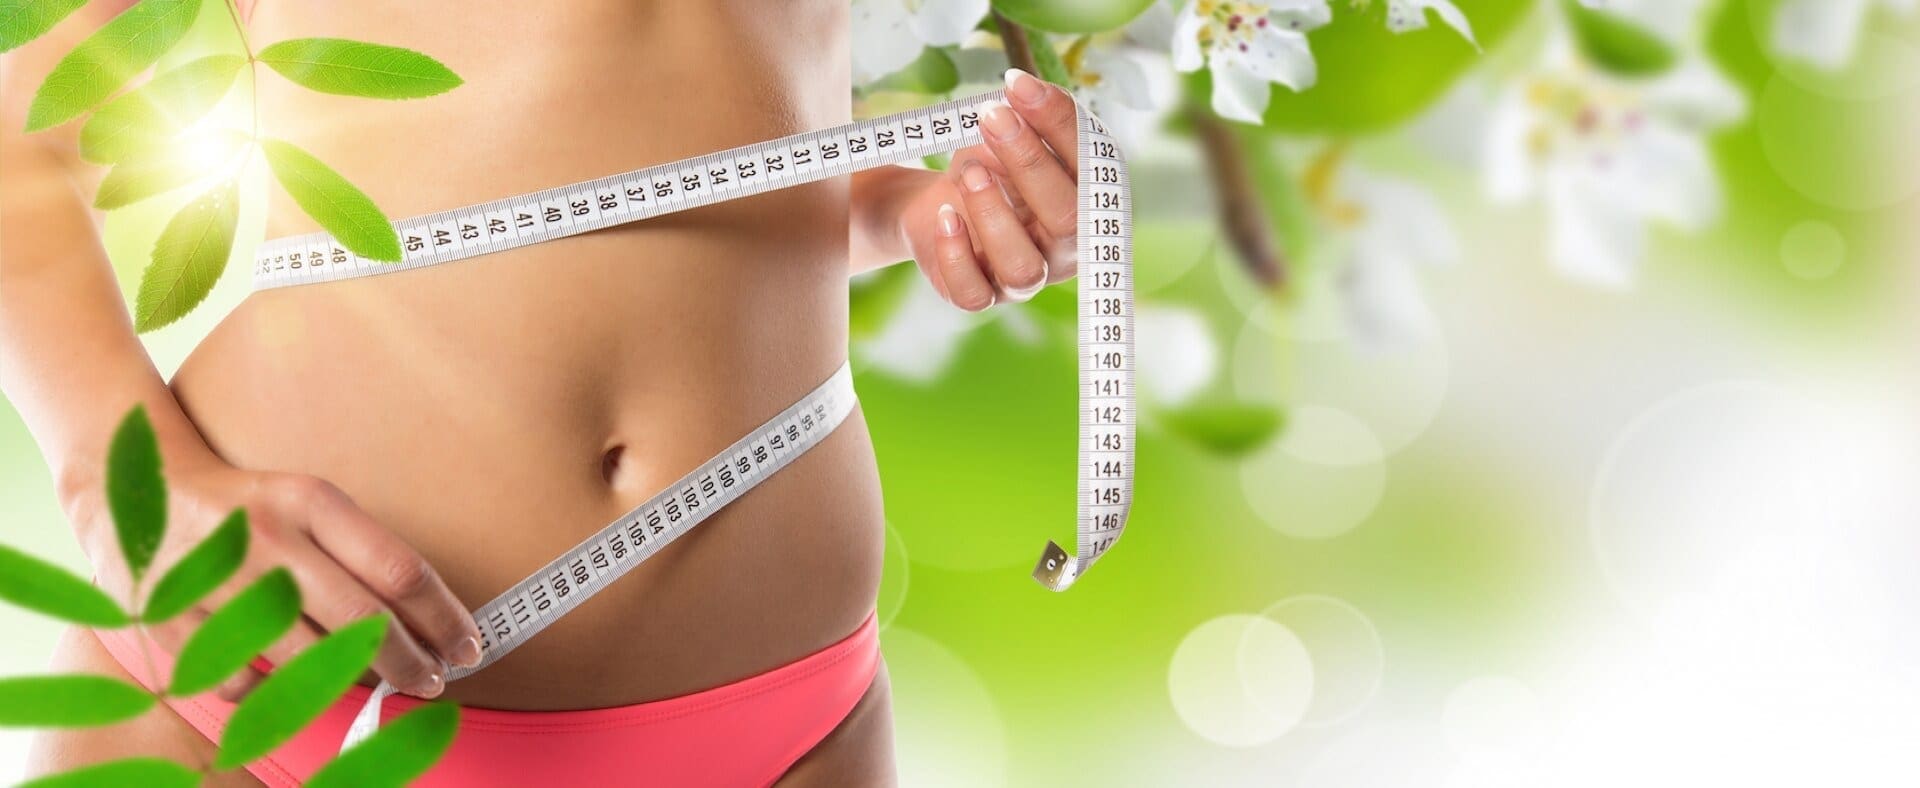 Naturopathic Weight Loss | Dr. Jiwani Naturopathic Physician Vancouver Burnaby Surrey